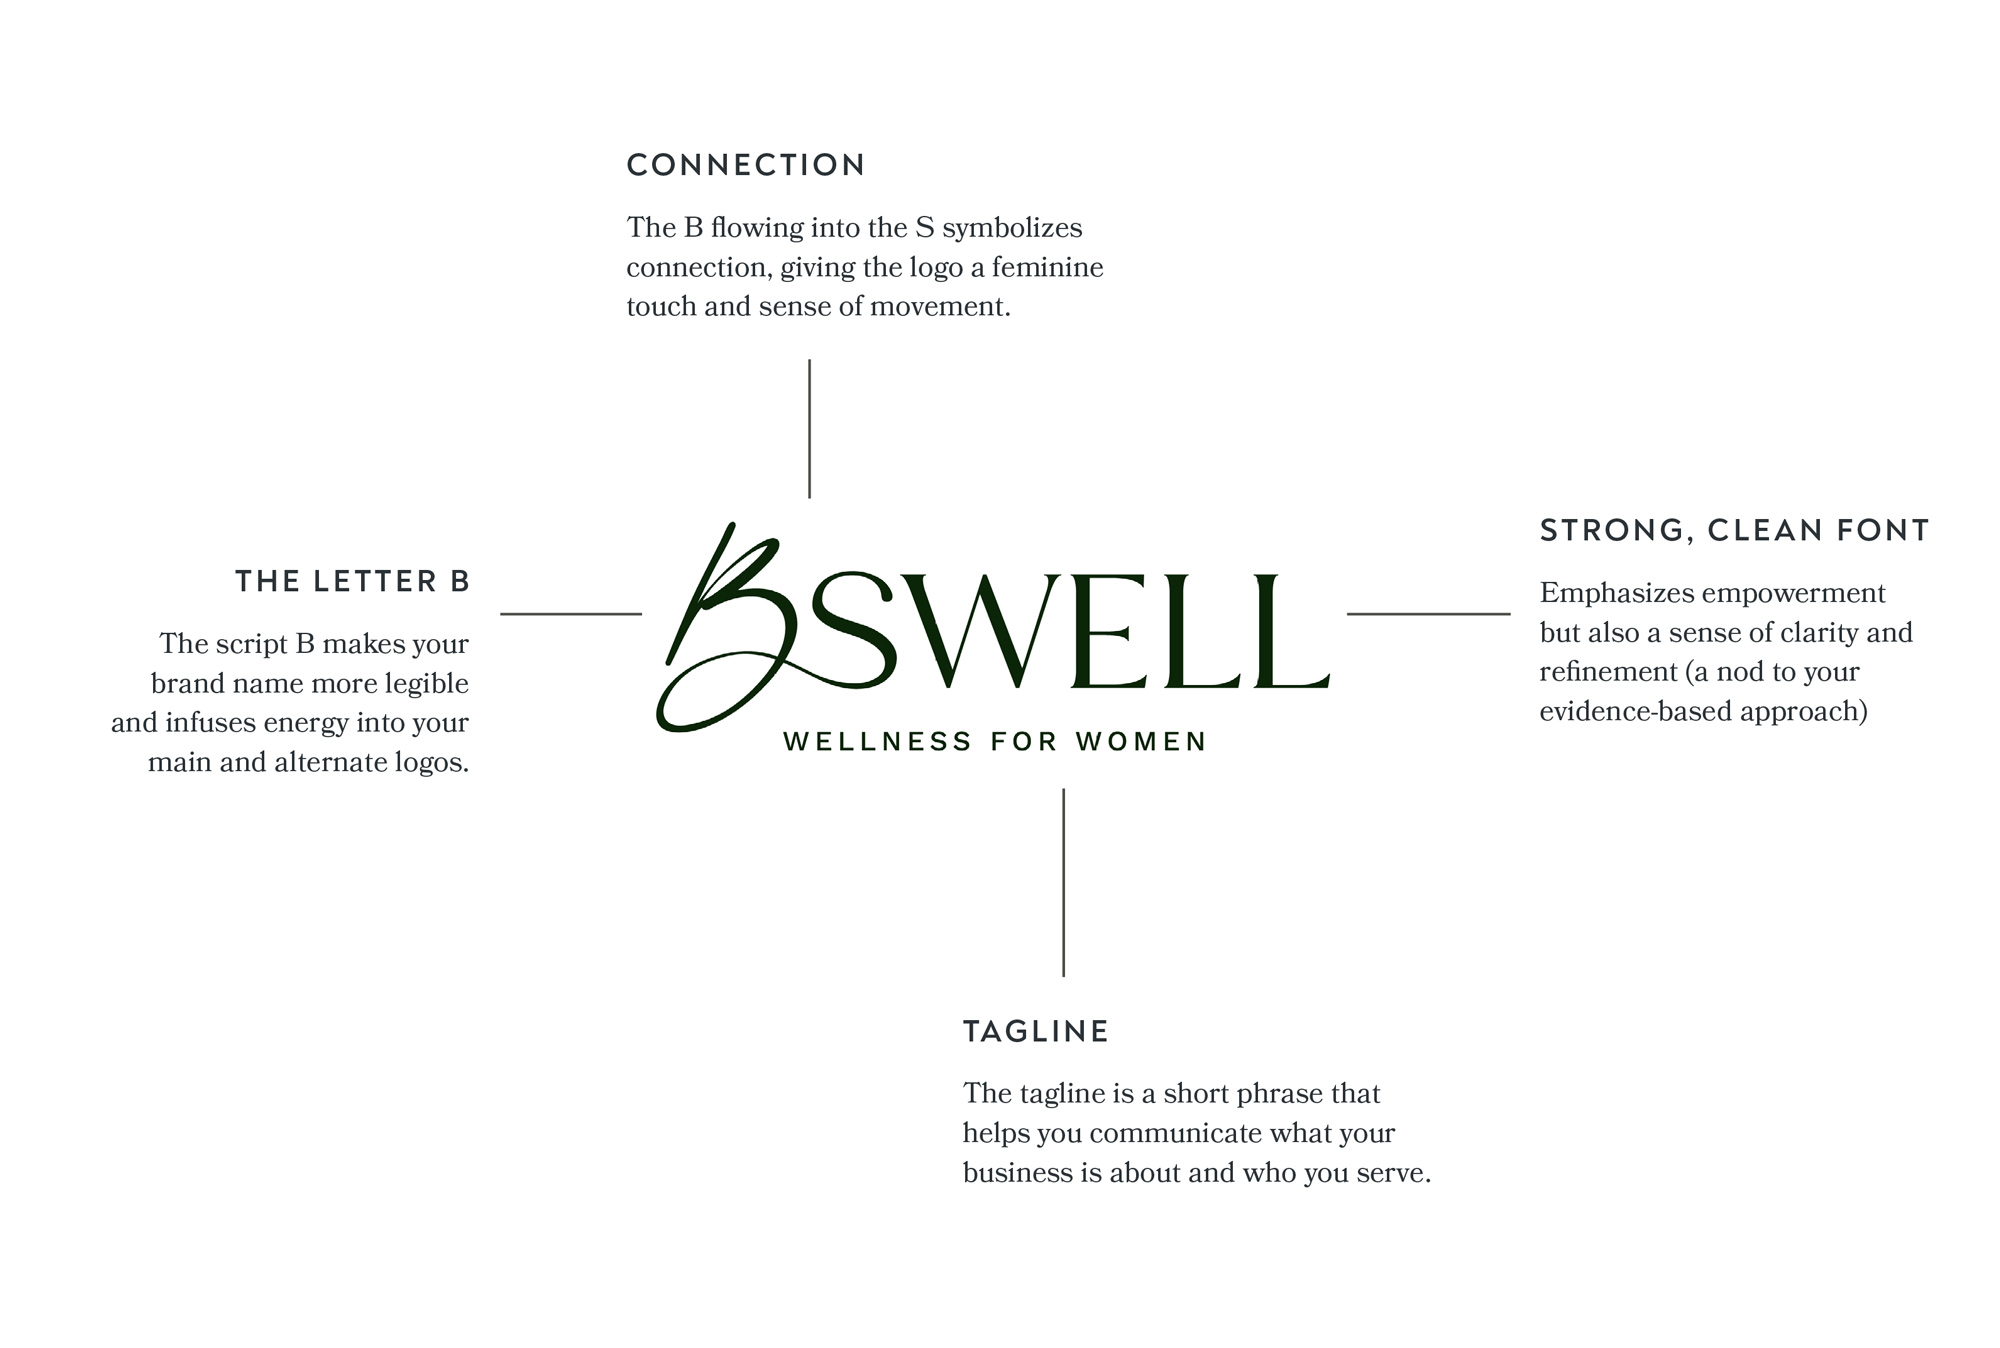 A breakdown of the logo design process showing the thinking behind each design decision and how it aligns with BSwell's brand strategy